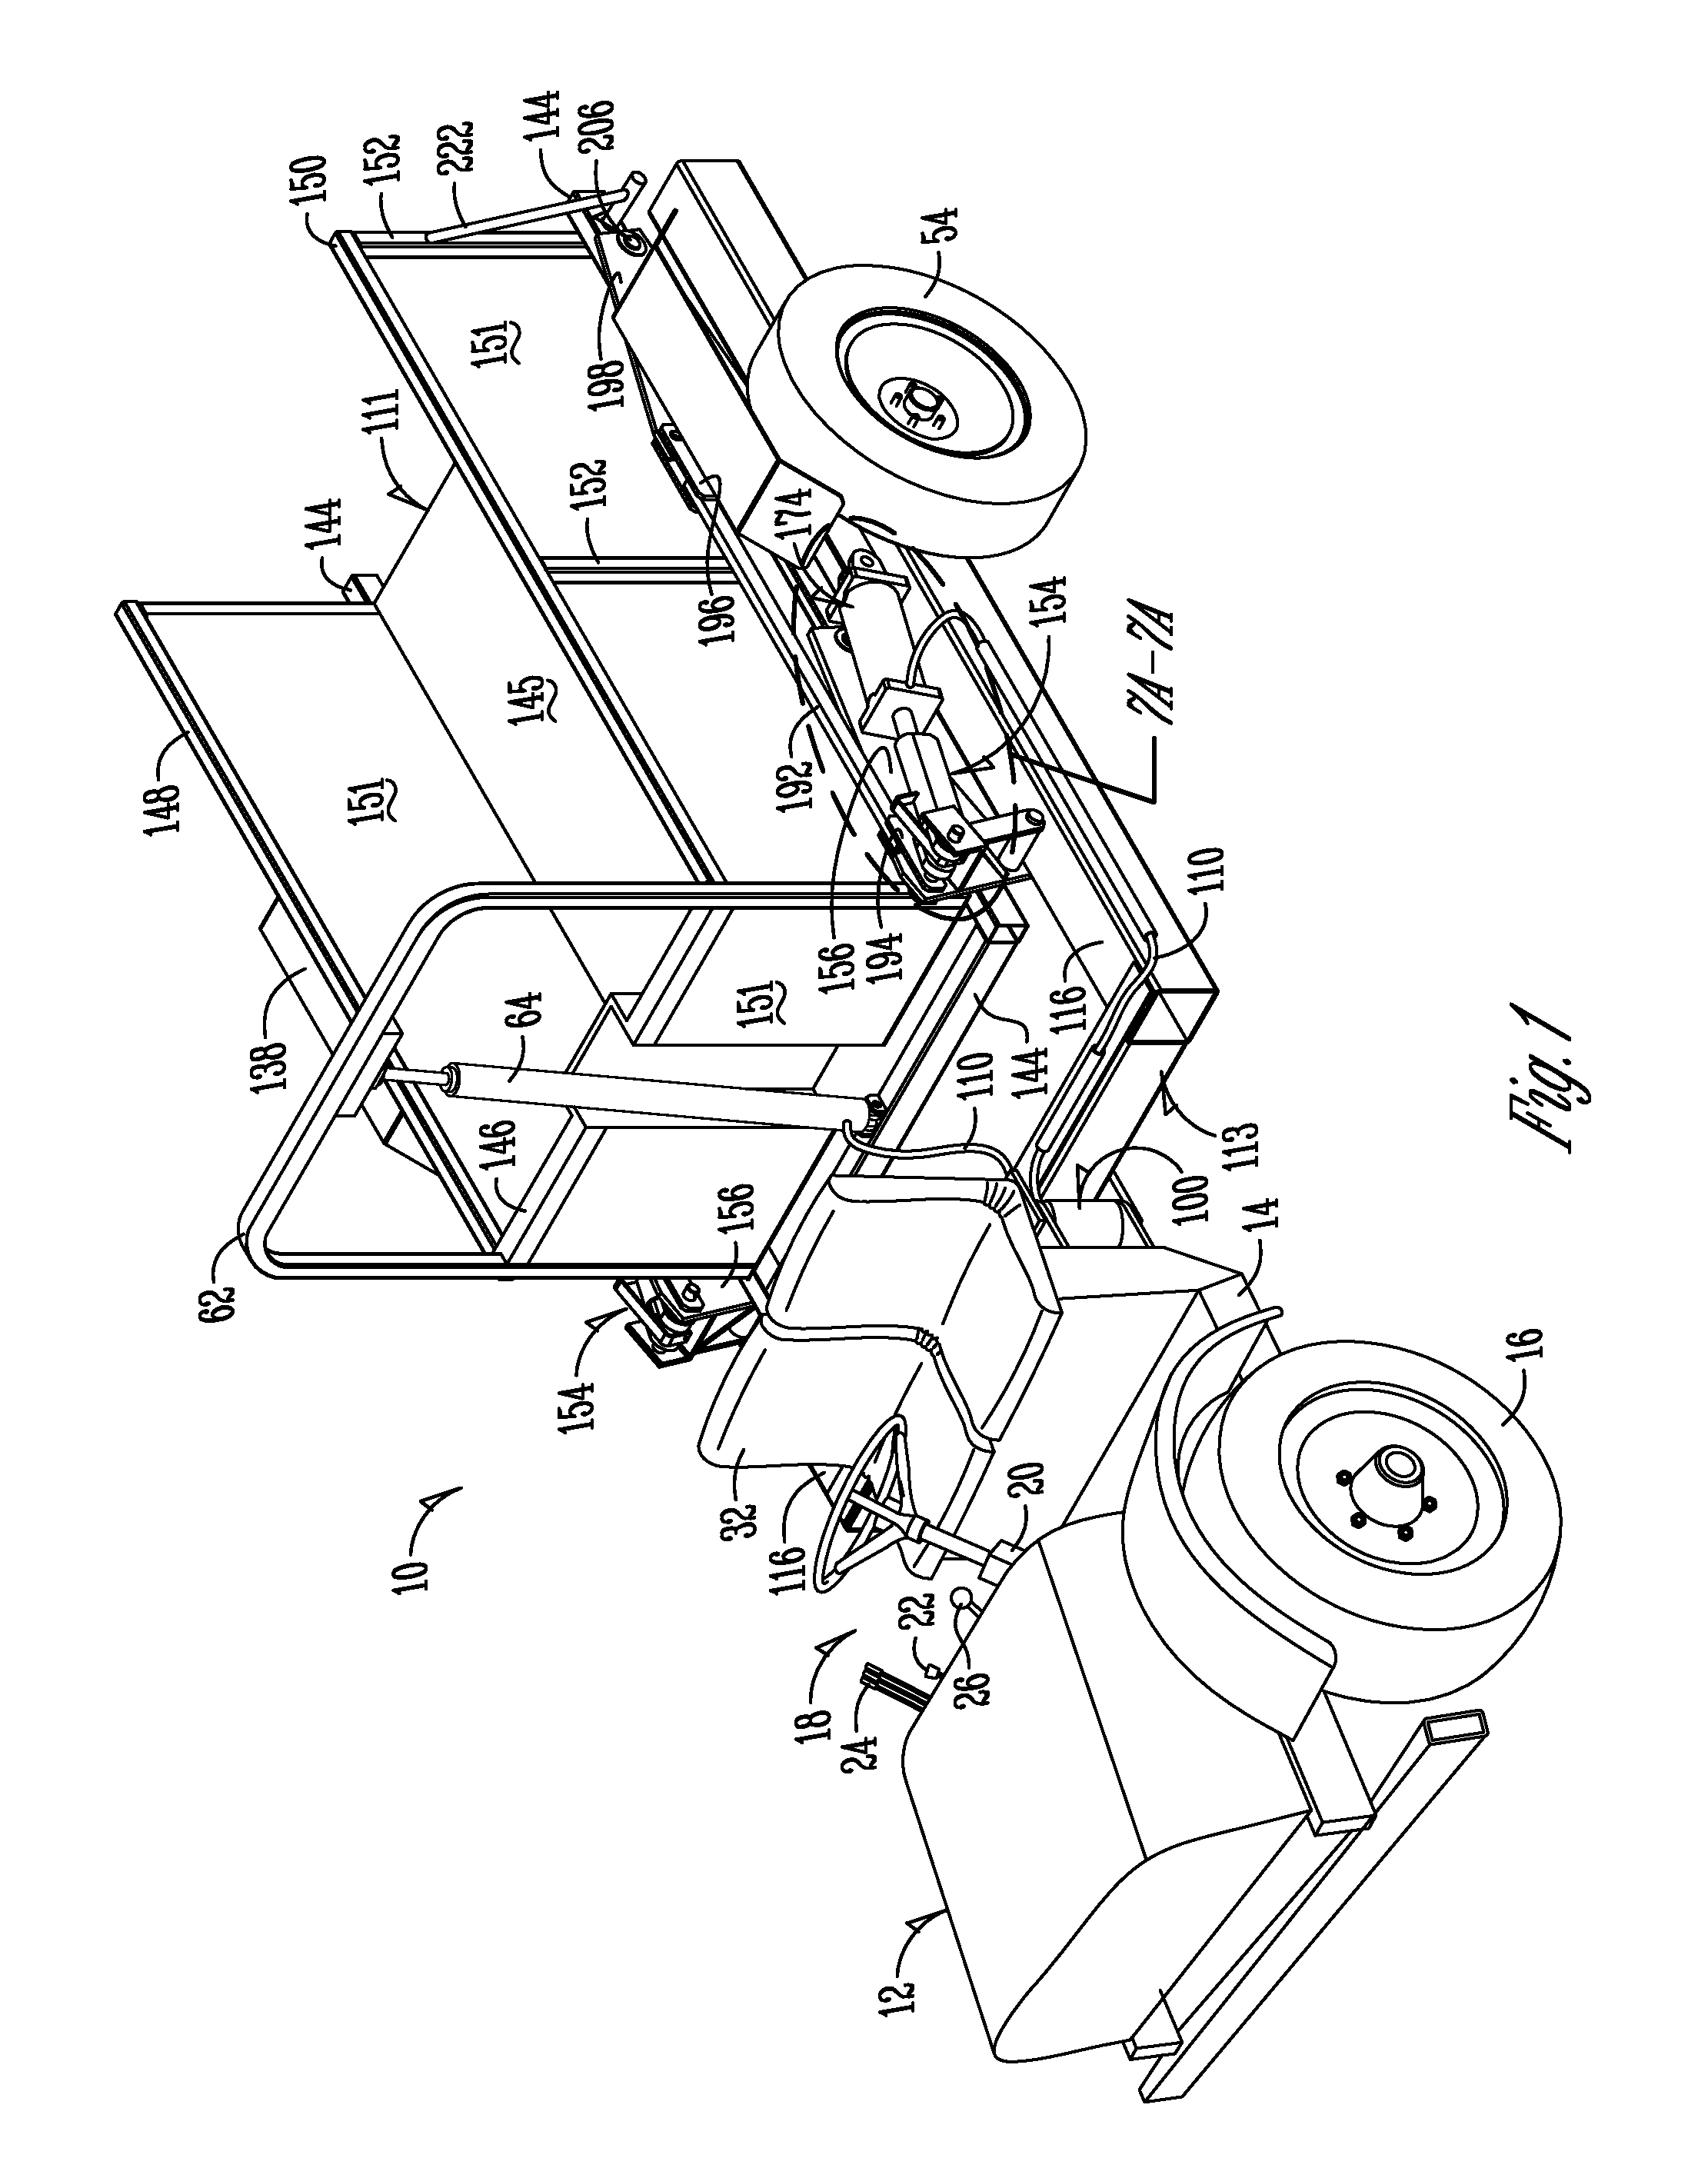 Center-pivot steering articulated vehicle with load lifting trailer